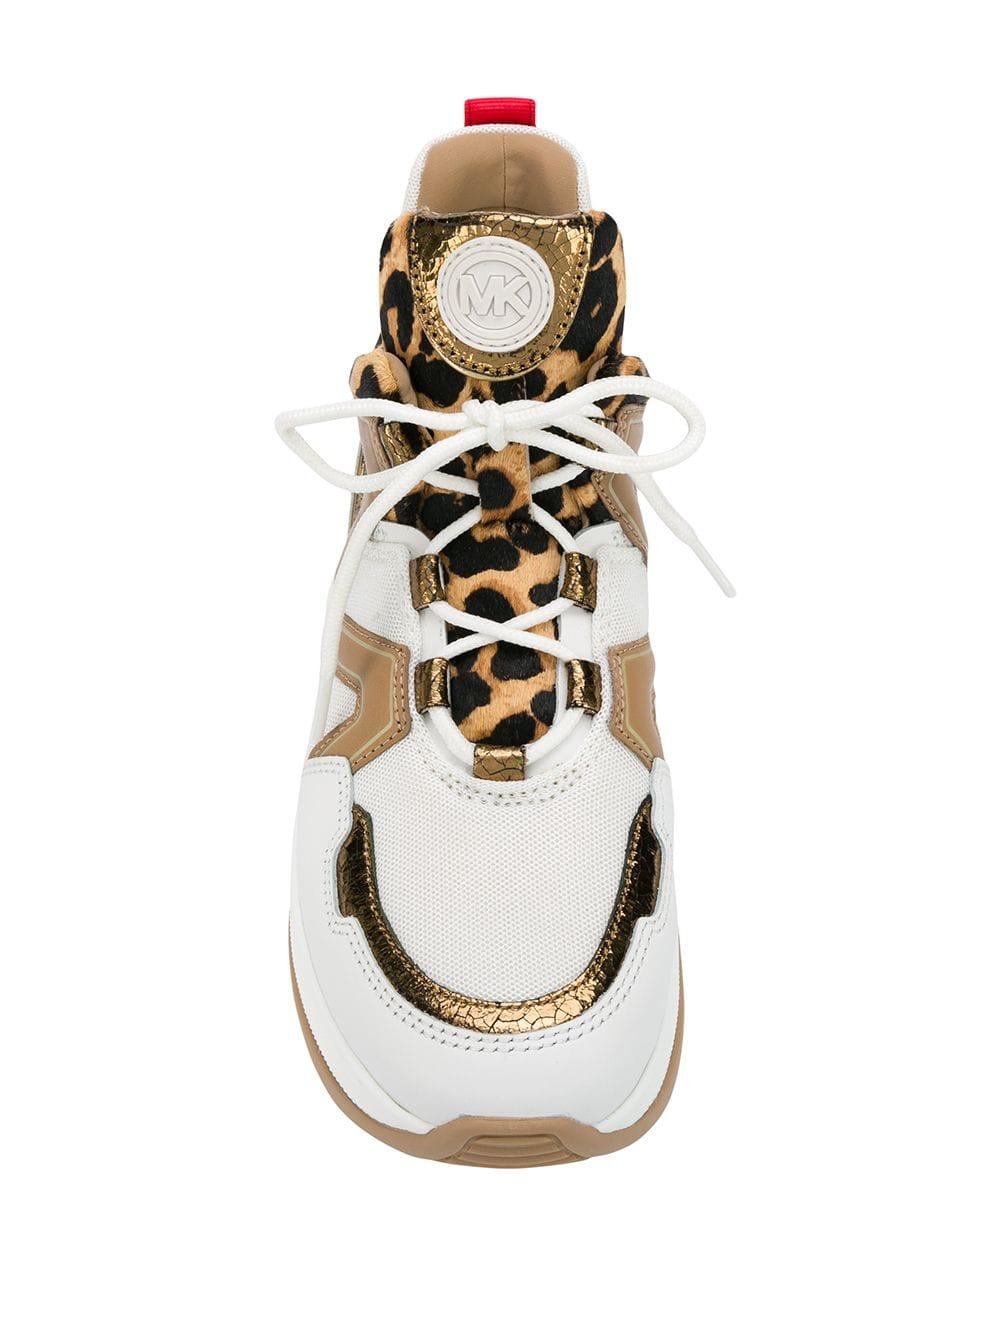 Michael Kors Olympia Leopard Calf Hair And Leather Trainer in White | Lyst